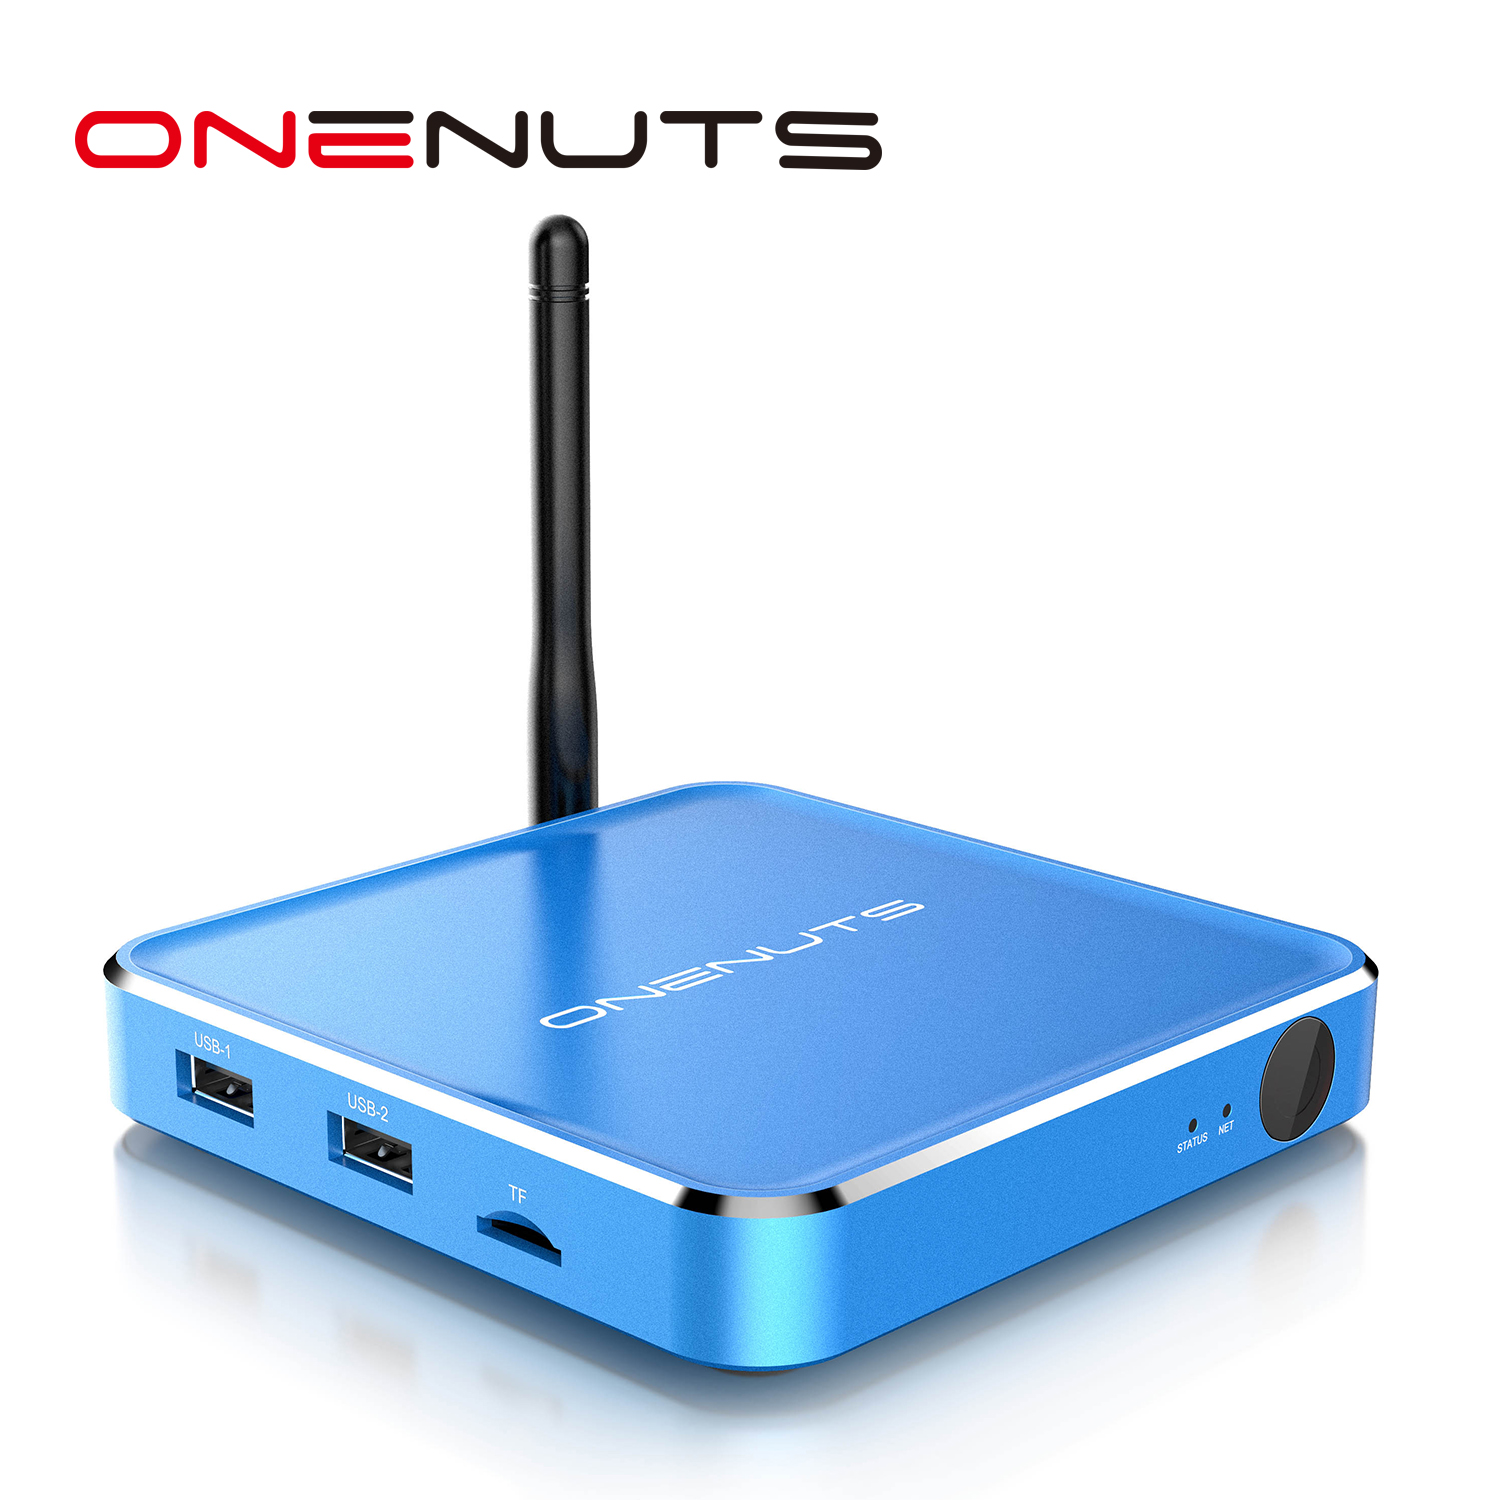 Internet TV Box HDMI input, New Android TV Box with Android 6.0